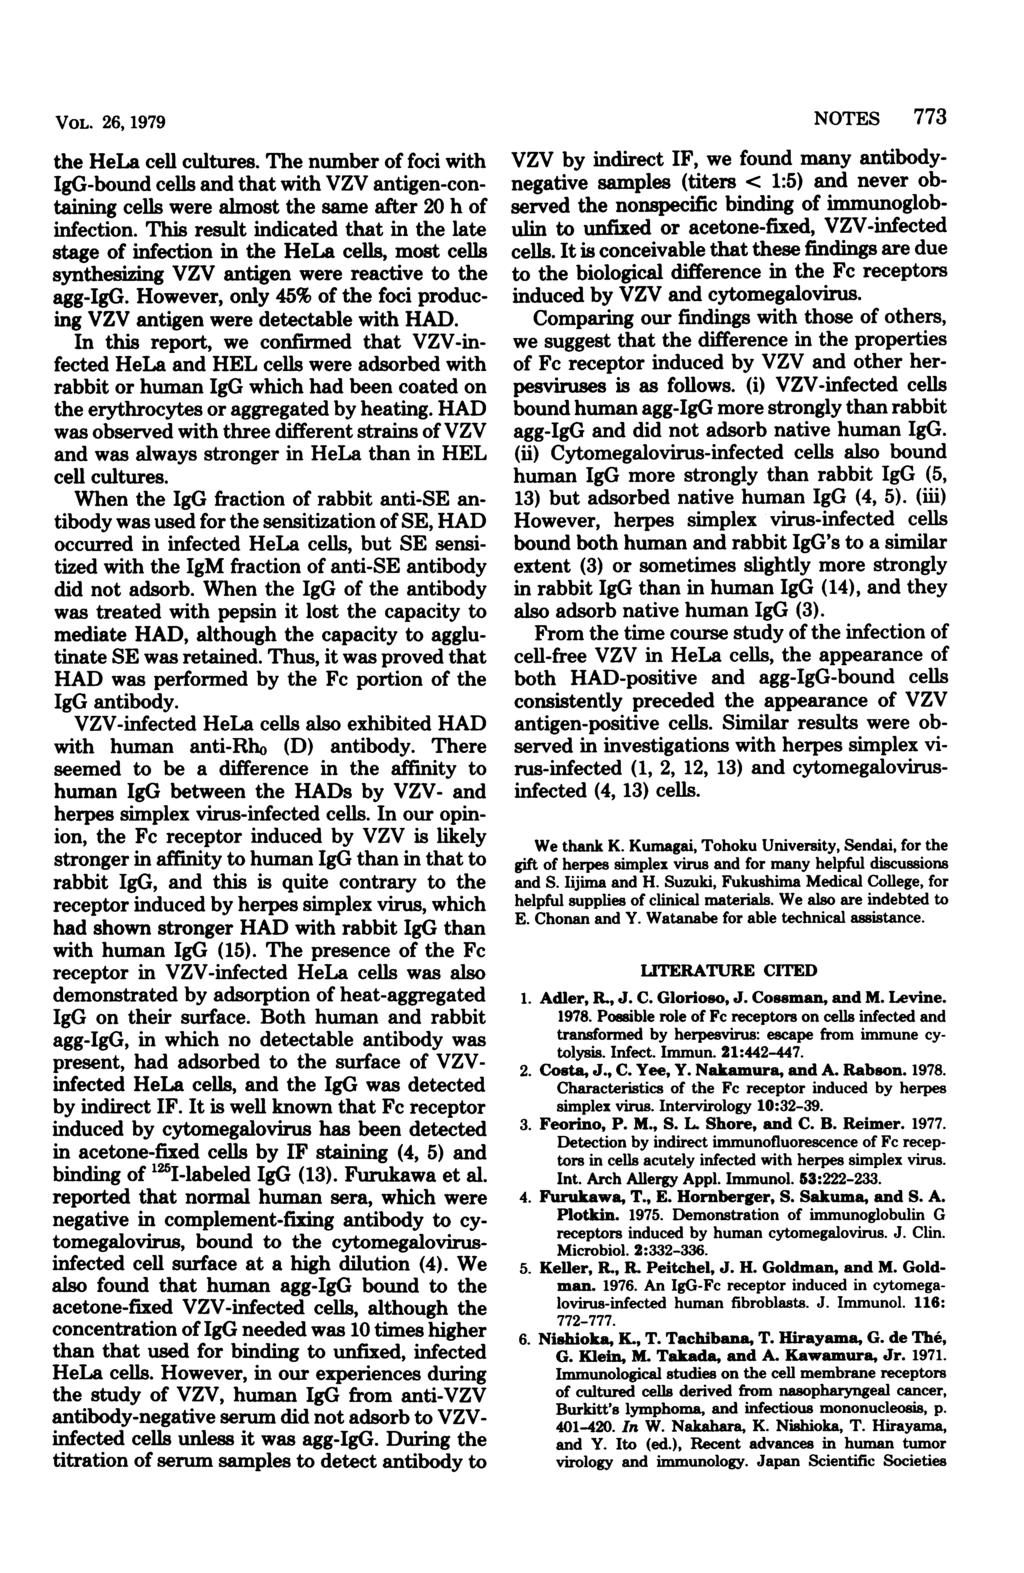 VOL. 26, 1979 the HeLa cell cultures. The number of foci with IgG-bound cells and that with VZV antigen-containing cells were almost the same after 2 h of infection.